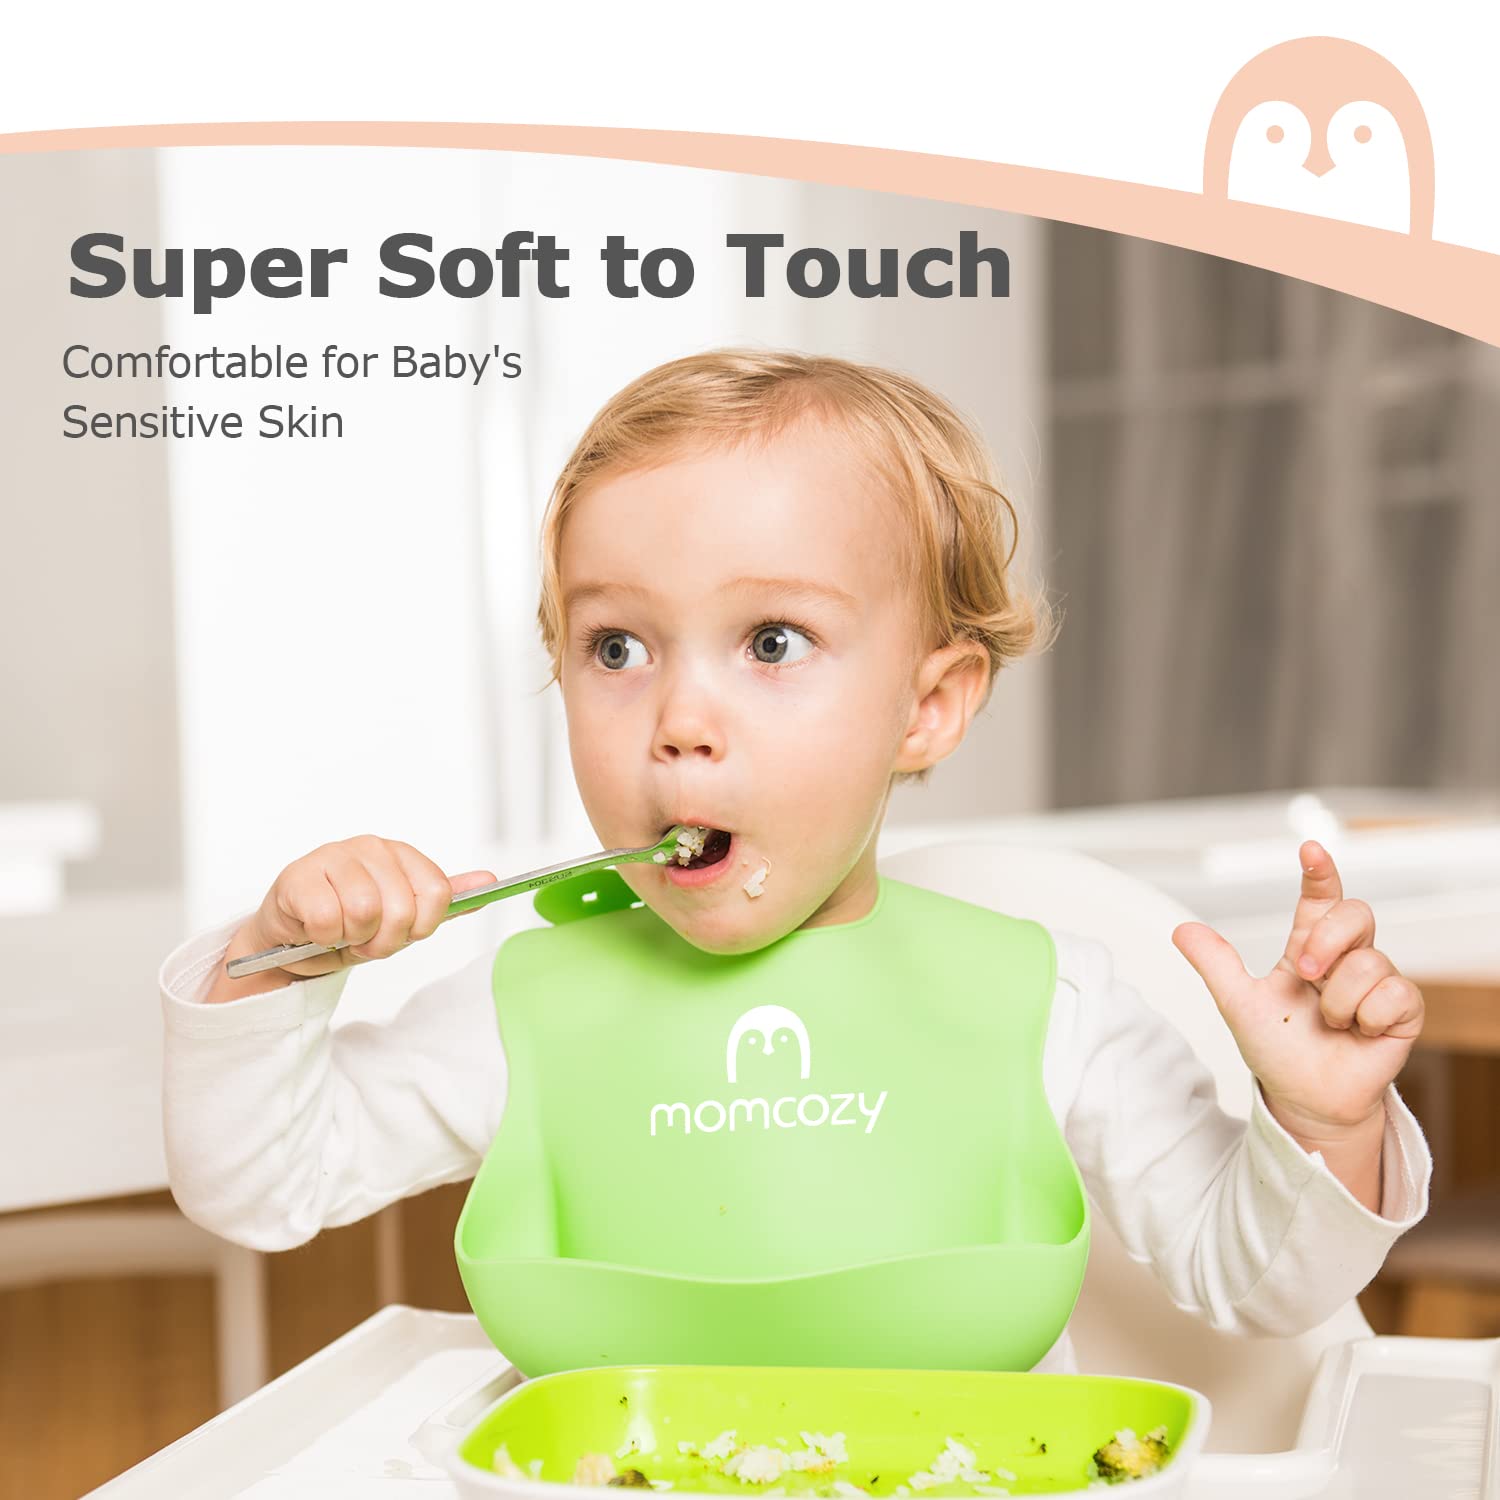 Momcozy Silicone Baby Bibs Easily Clean, Soft Adjustable Waterproof Silicone Bibs (Green White and Grey)